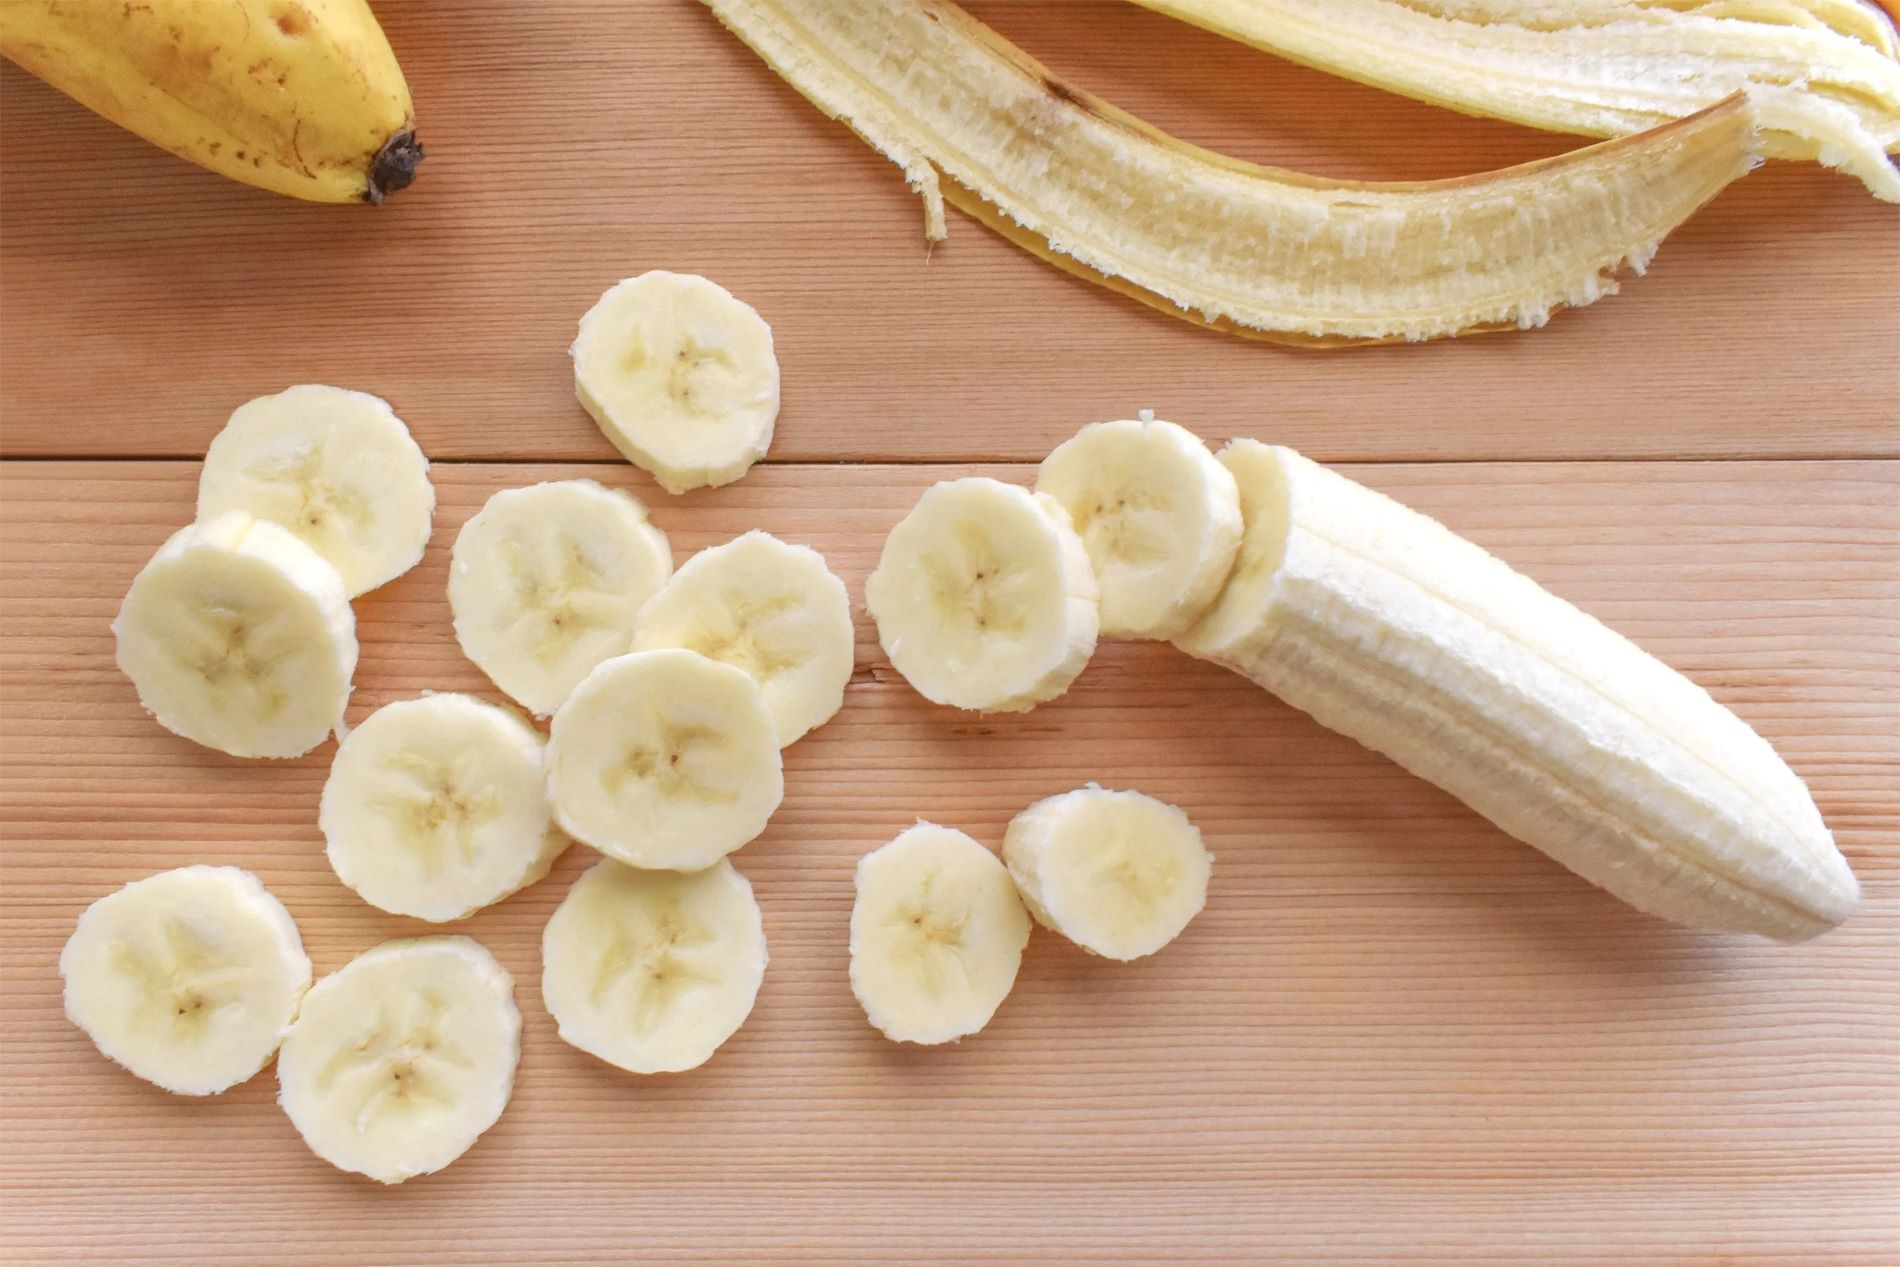 how-to-cut-a-banana-for-a-9-month-old